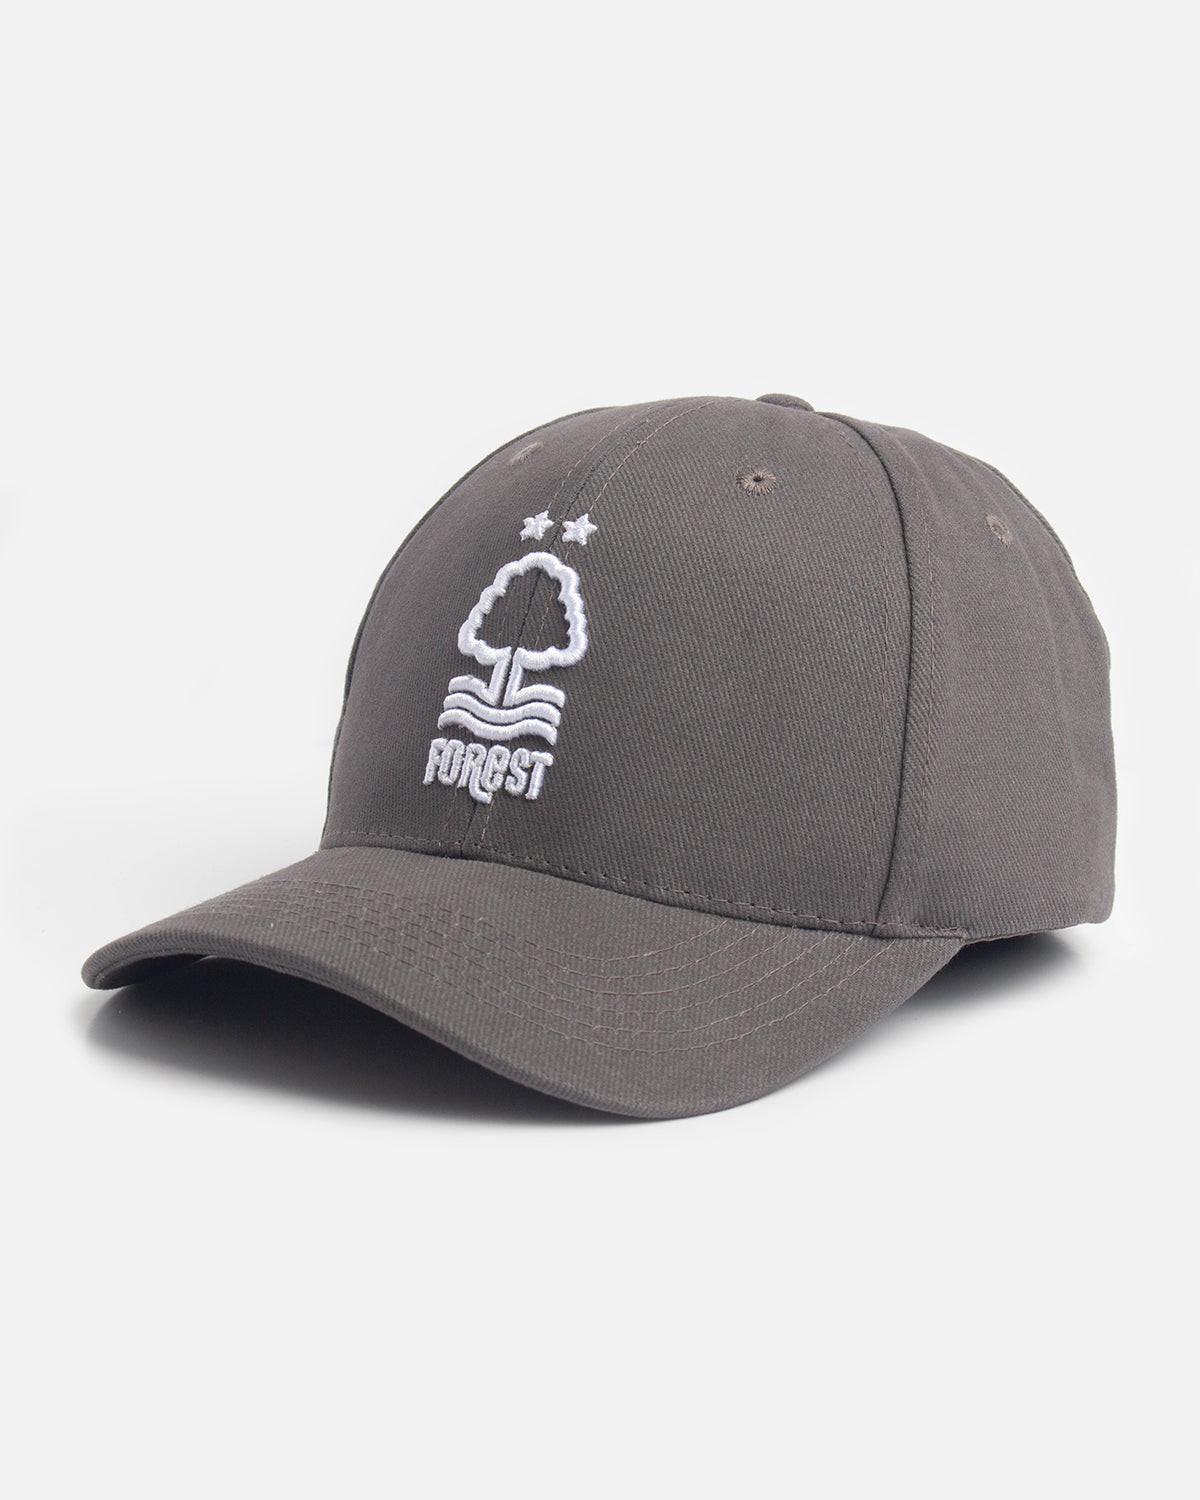 NFFC Charcoal Structured Cap